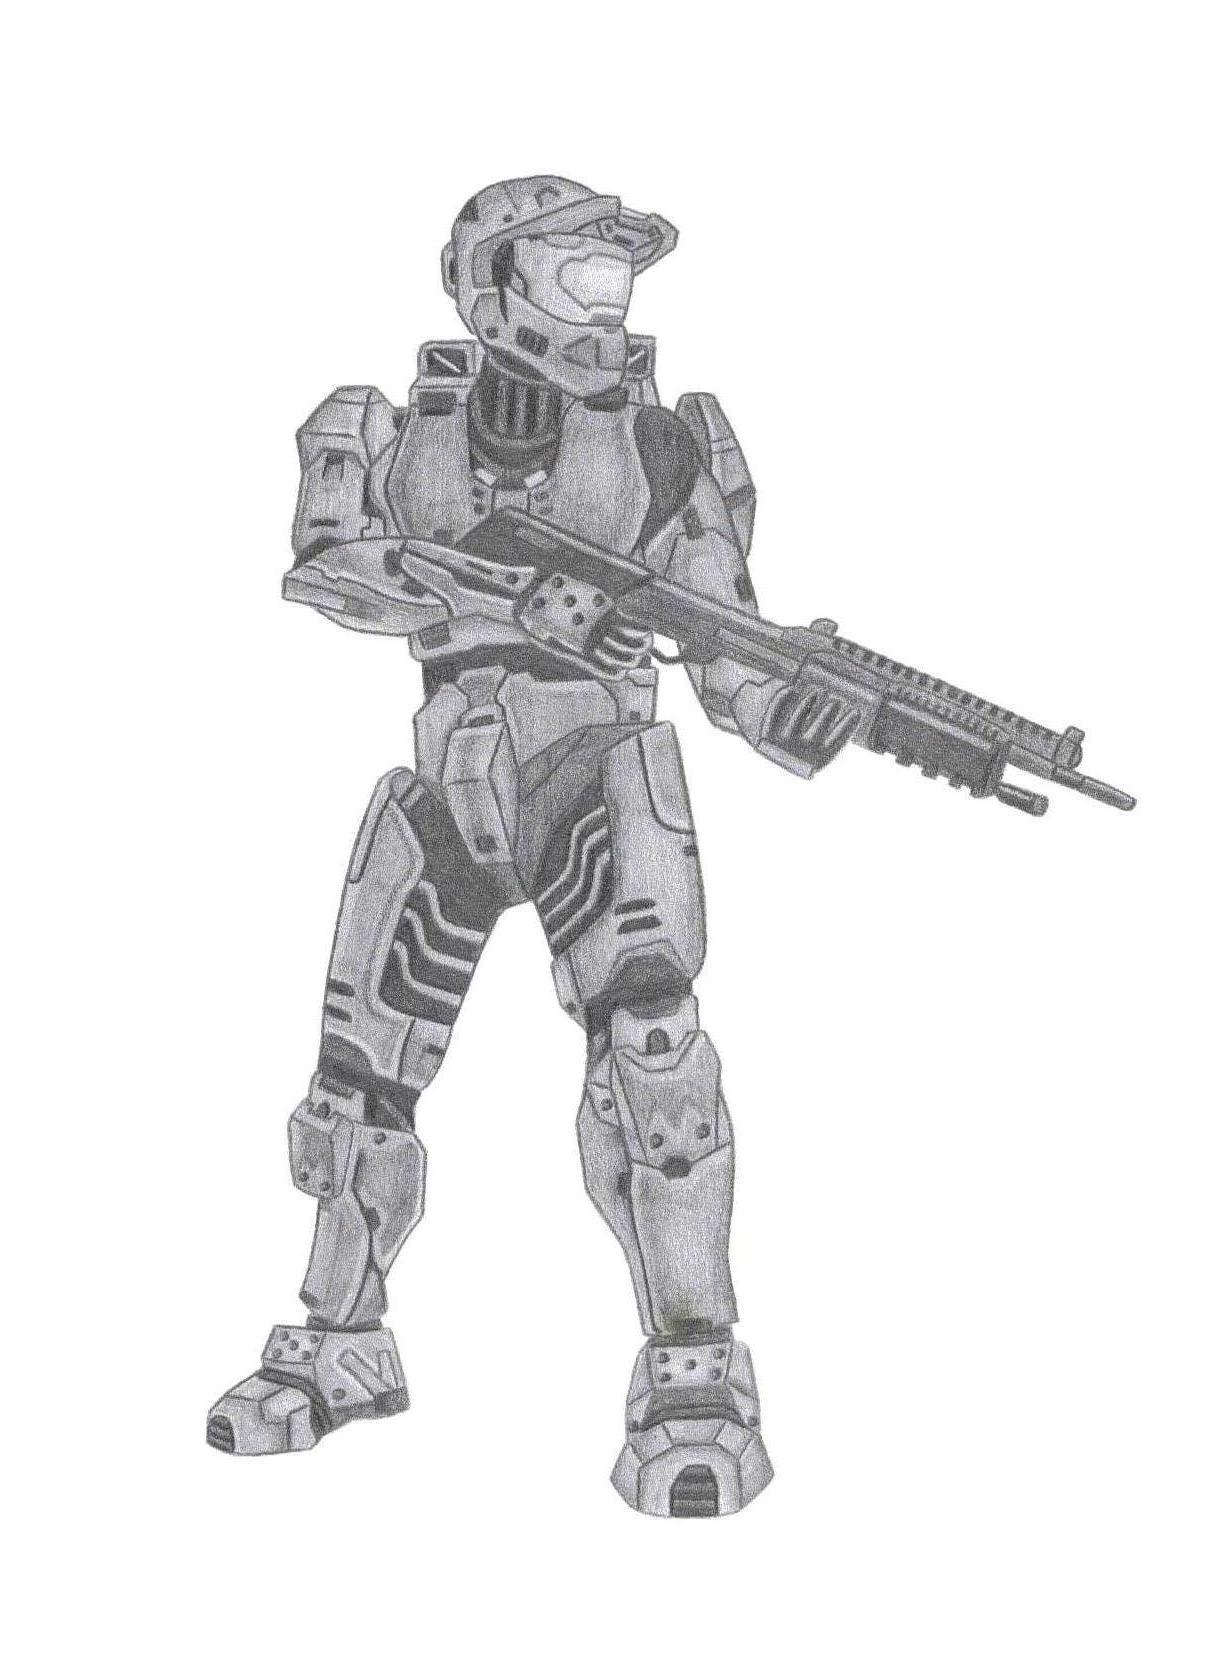 Master Chief by Twister